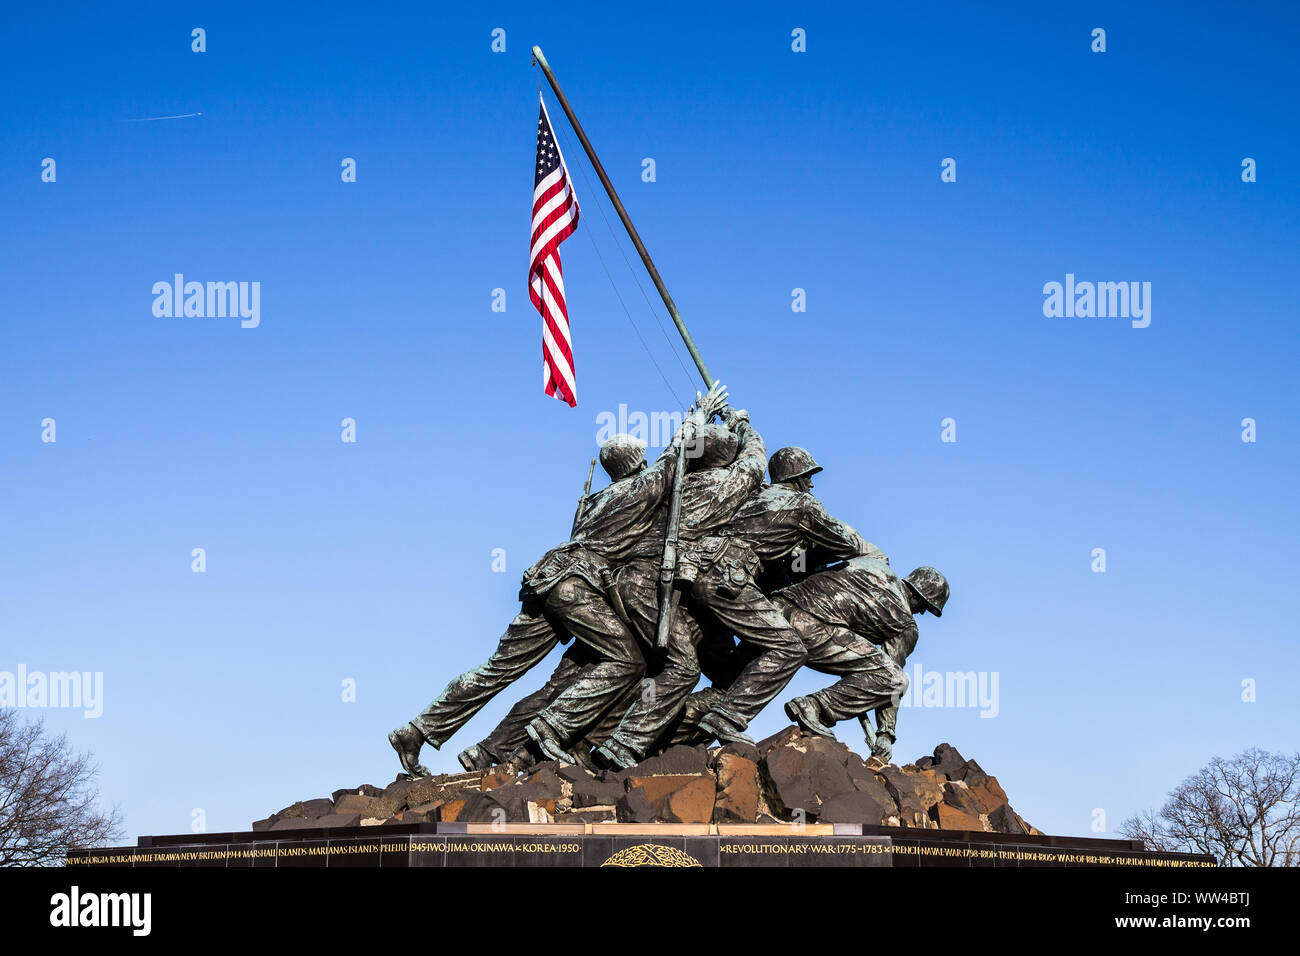 Marine Corps War Memorial, based on the iconic image of the second flag-raising on the island of Iwo Jima during World War II. Stock Photo